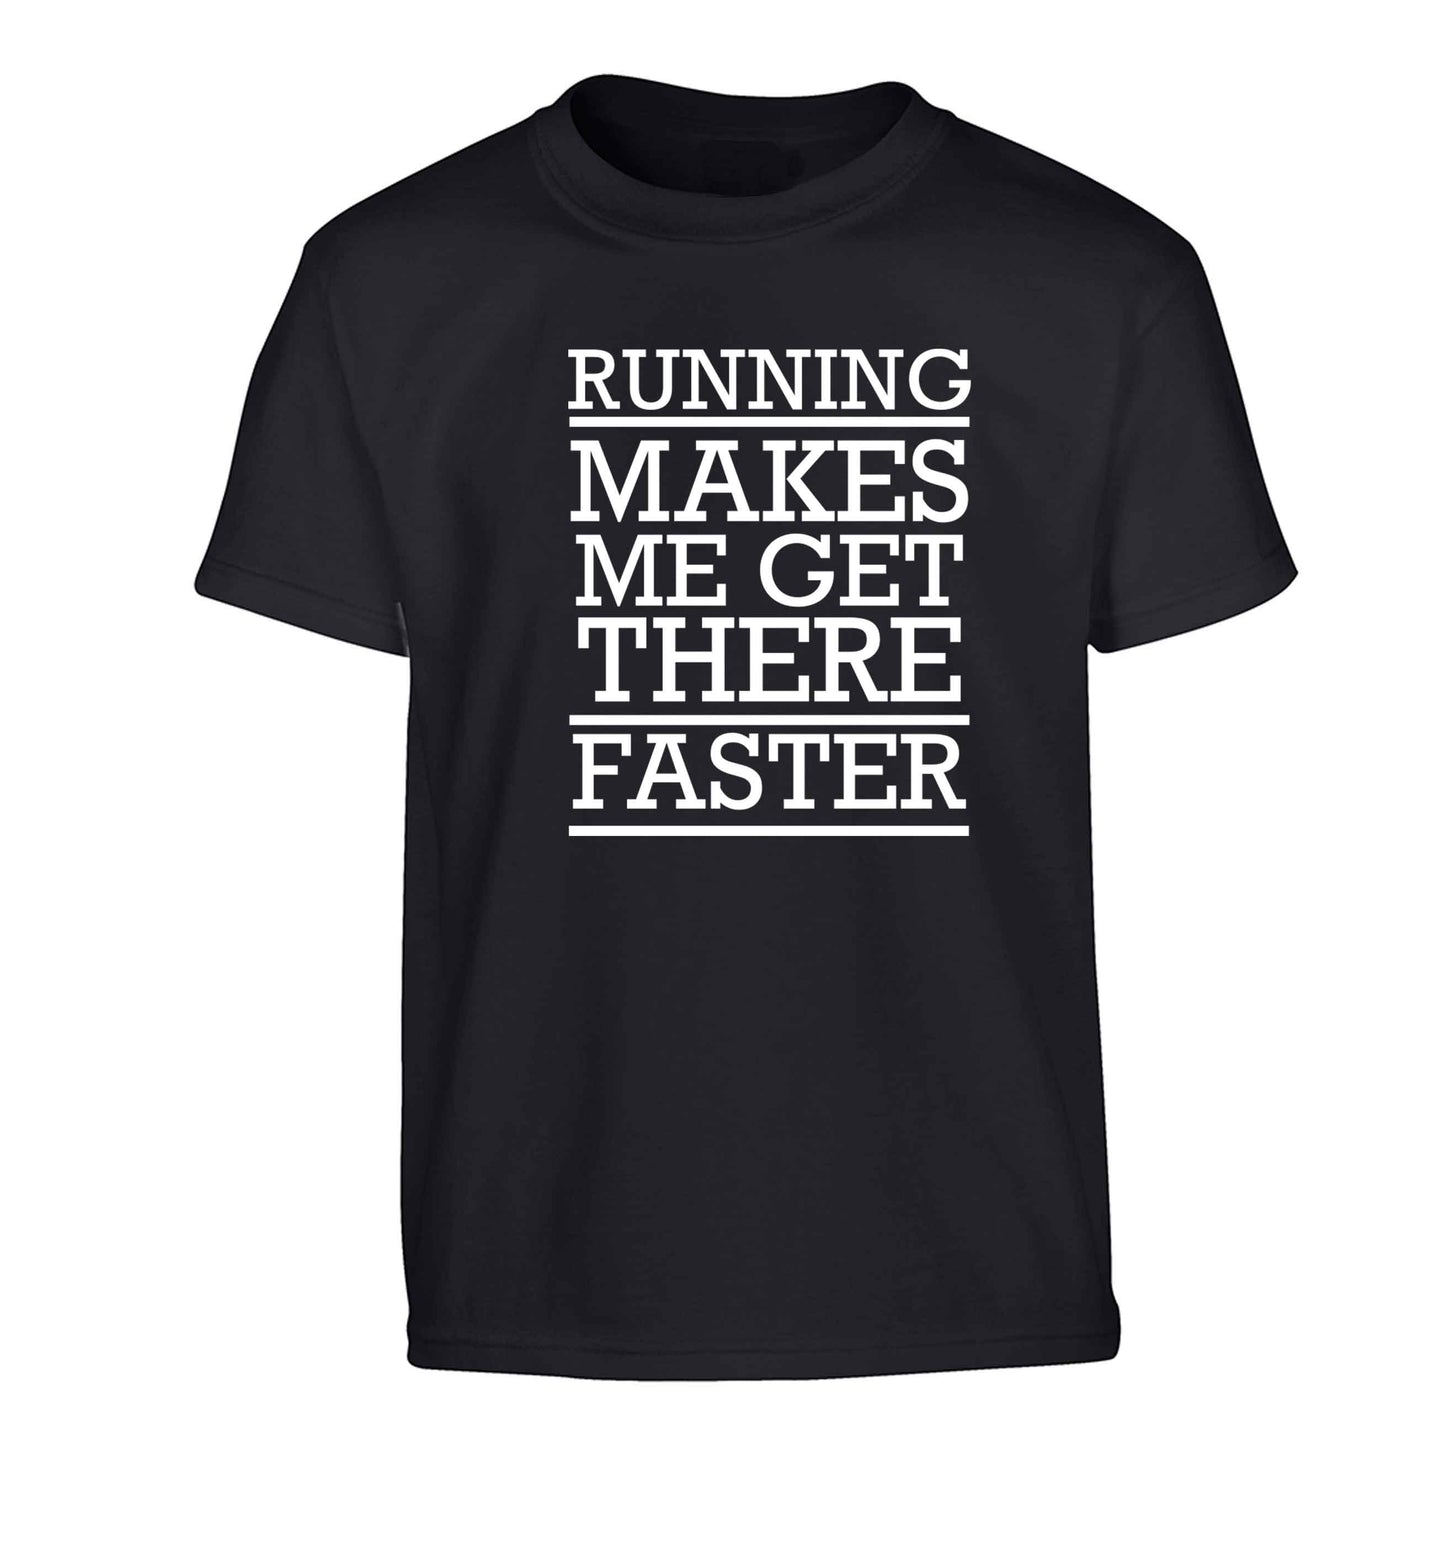 Running makes me get there faster Children's black Tshirt 12-13 Years